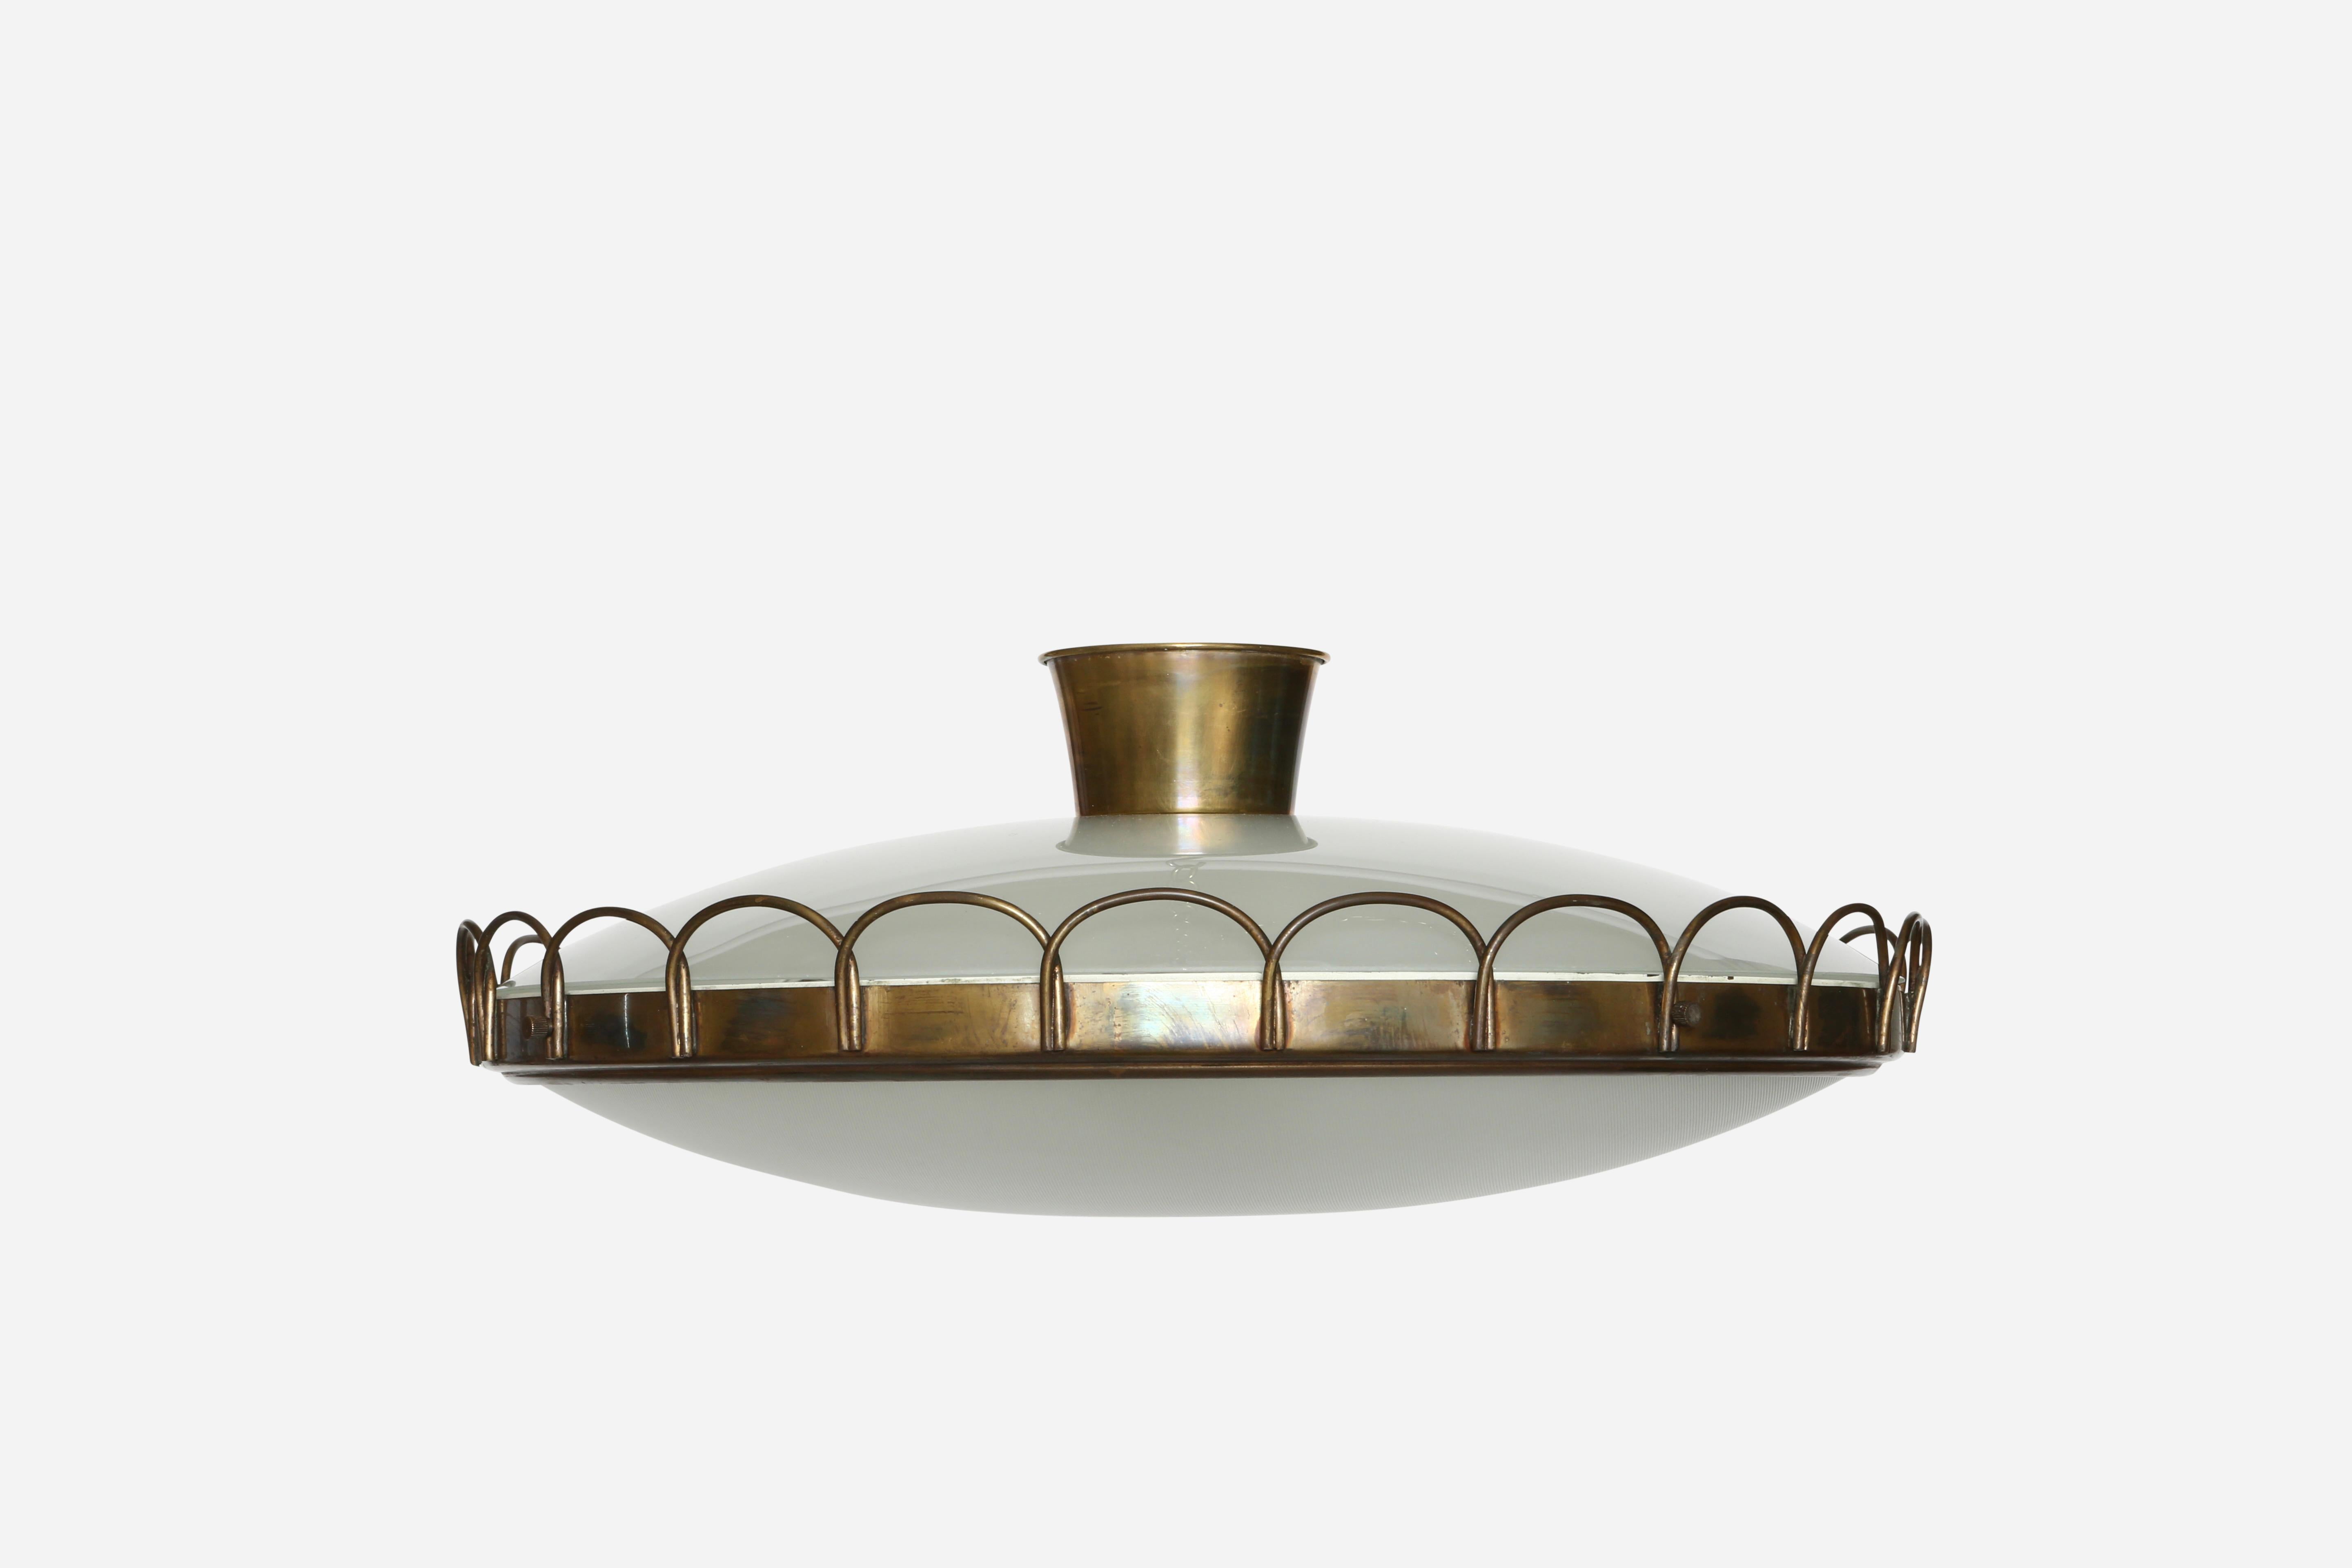 Pietro Chiesa for Fontana Arte attributed flush mount ceiling light
Designed and made in Italy in 1960s.
Textured glass on the bottom, opalescent glass on the top.
Scalloped brass border that frames the glass.
Takes 4 candelabra bulbs
Complimentary